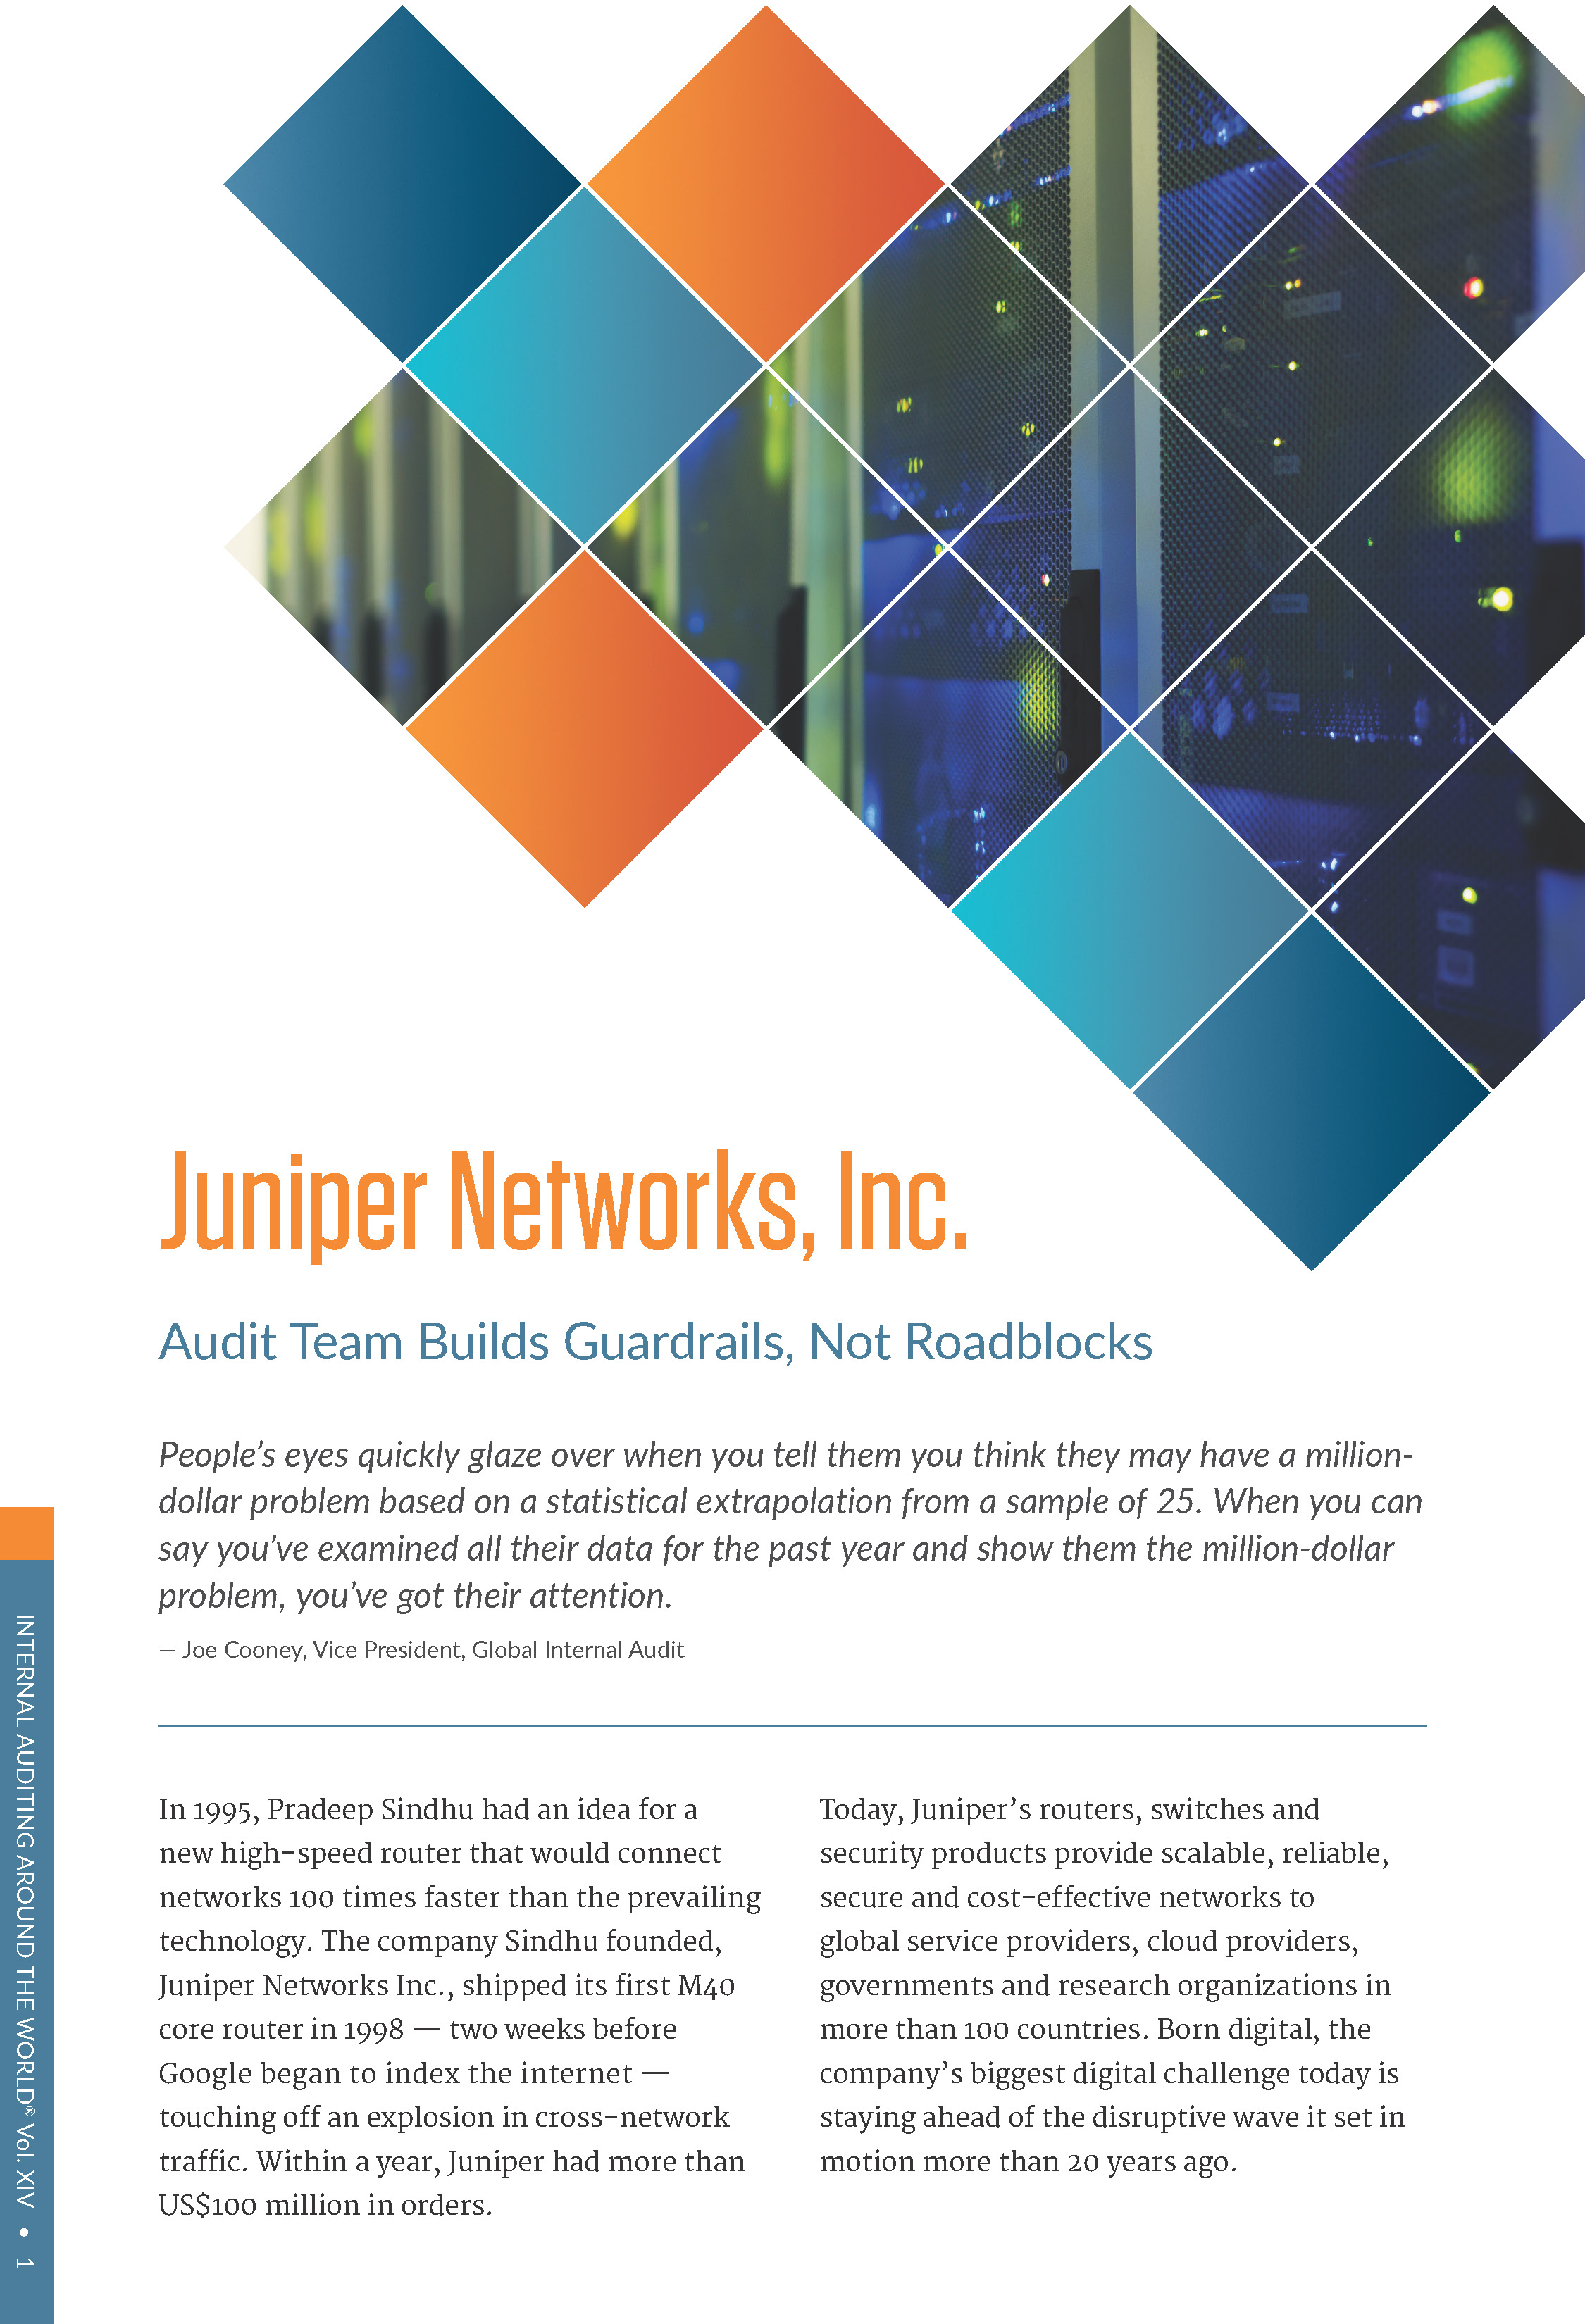 Screenshot of the first page of Juniper Networks, Inc. Audit Team Builds Guardrails, Not Roadblocks